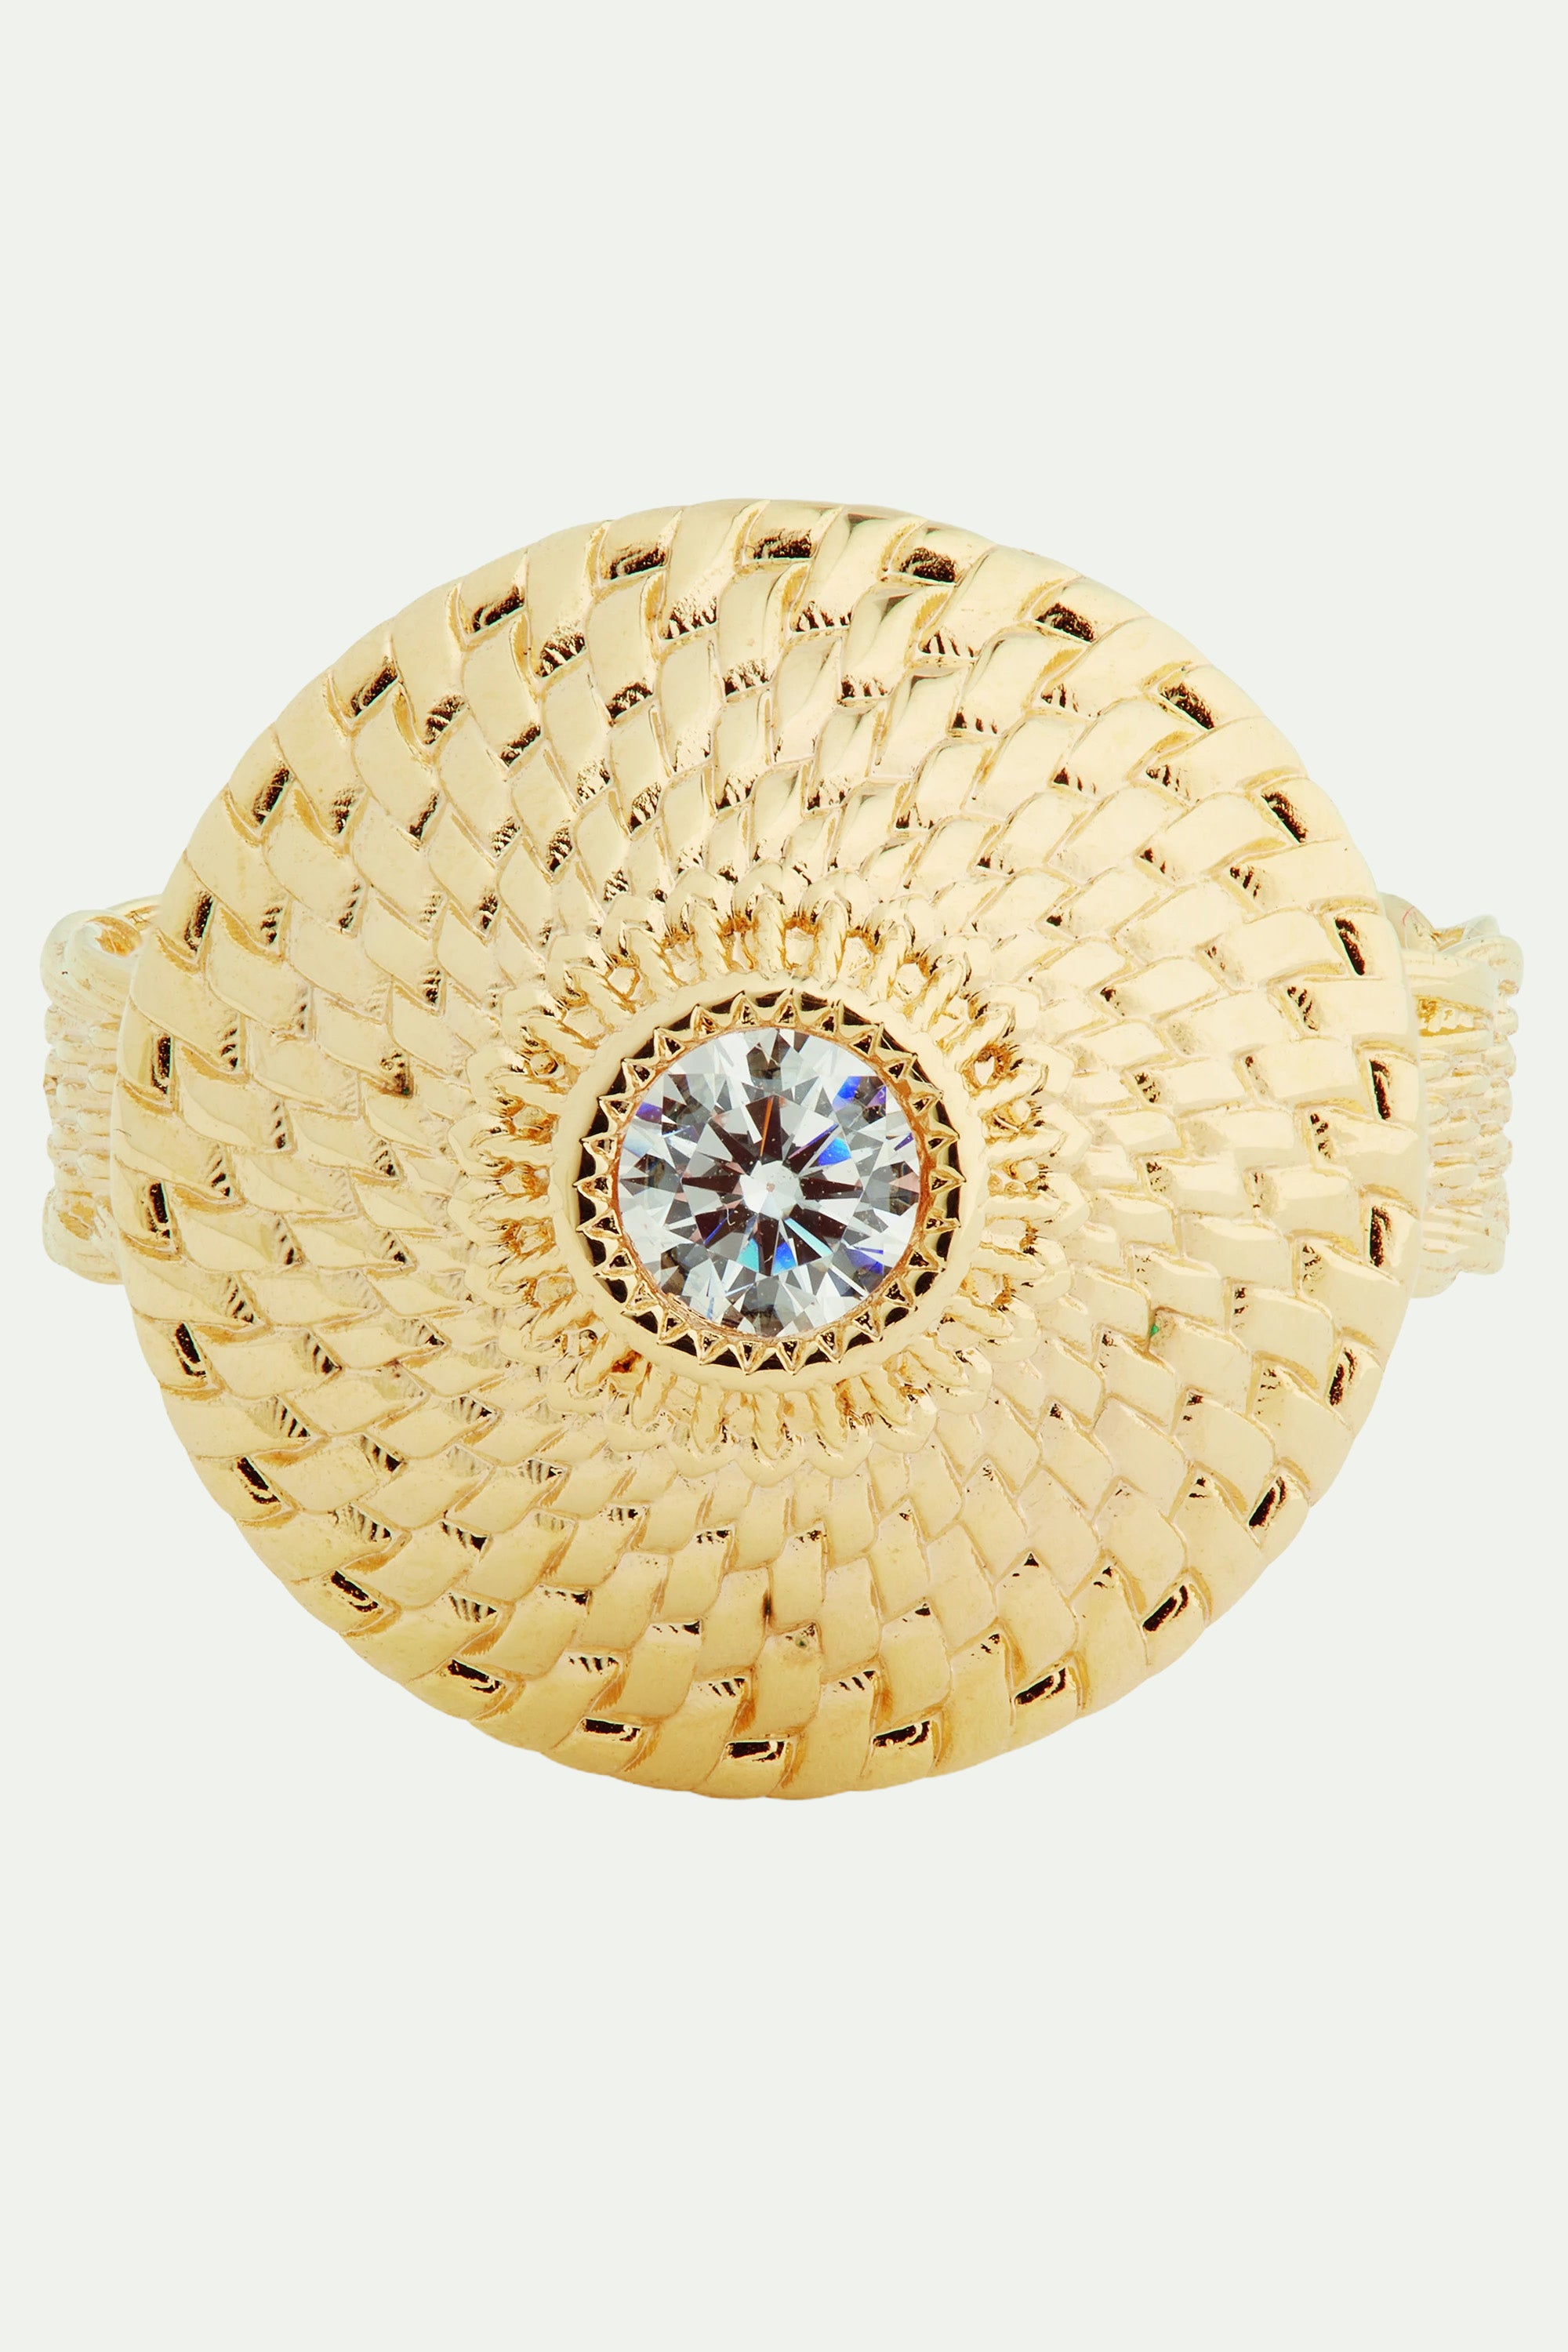 Wicker cocktail ring